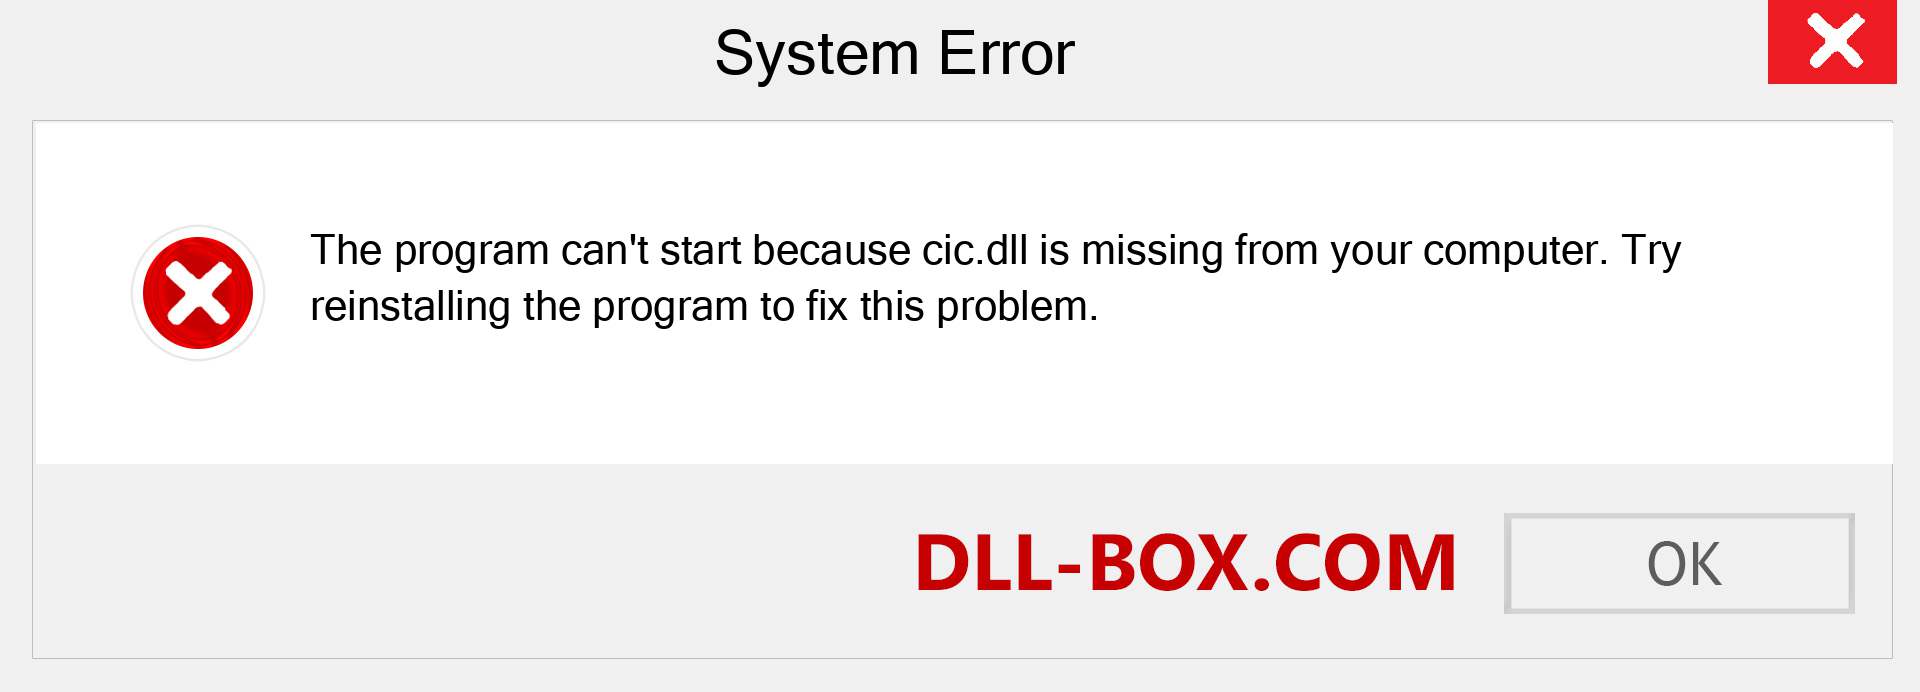  cic.dll file is missing?. Download for Windows 7, 8, 10 - Fix  cic dll Missing Error on Windows, photos, images